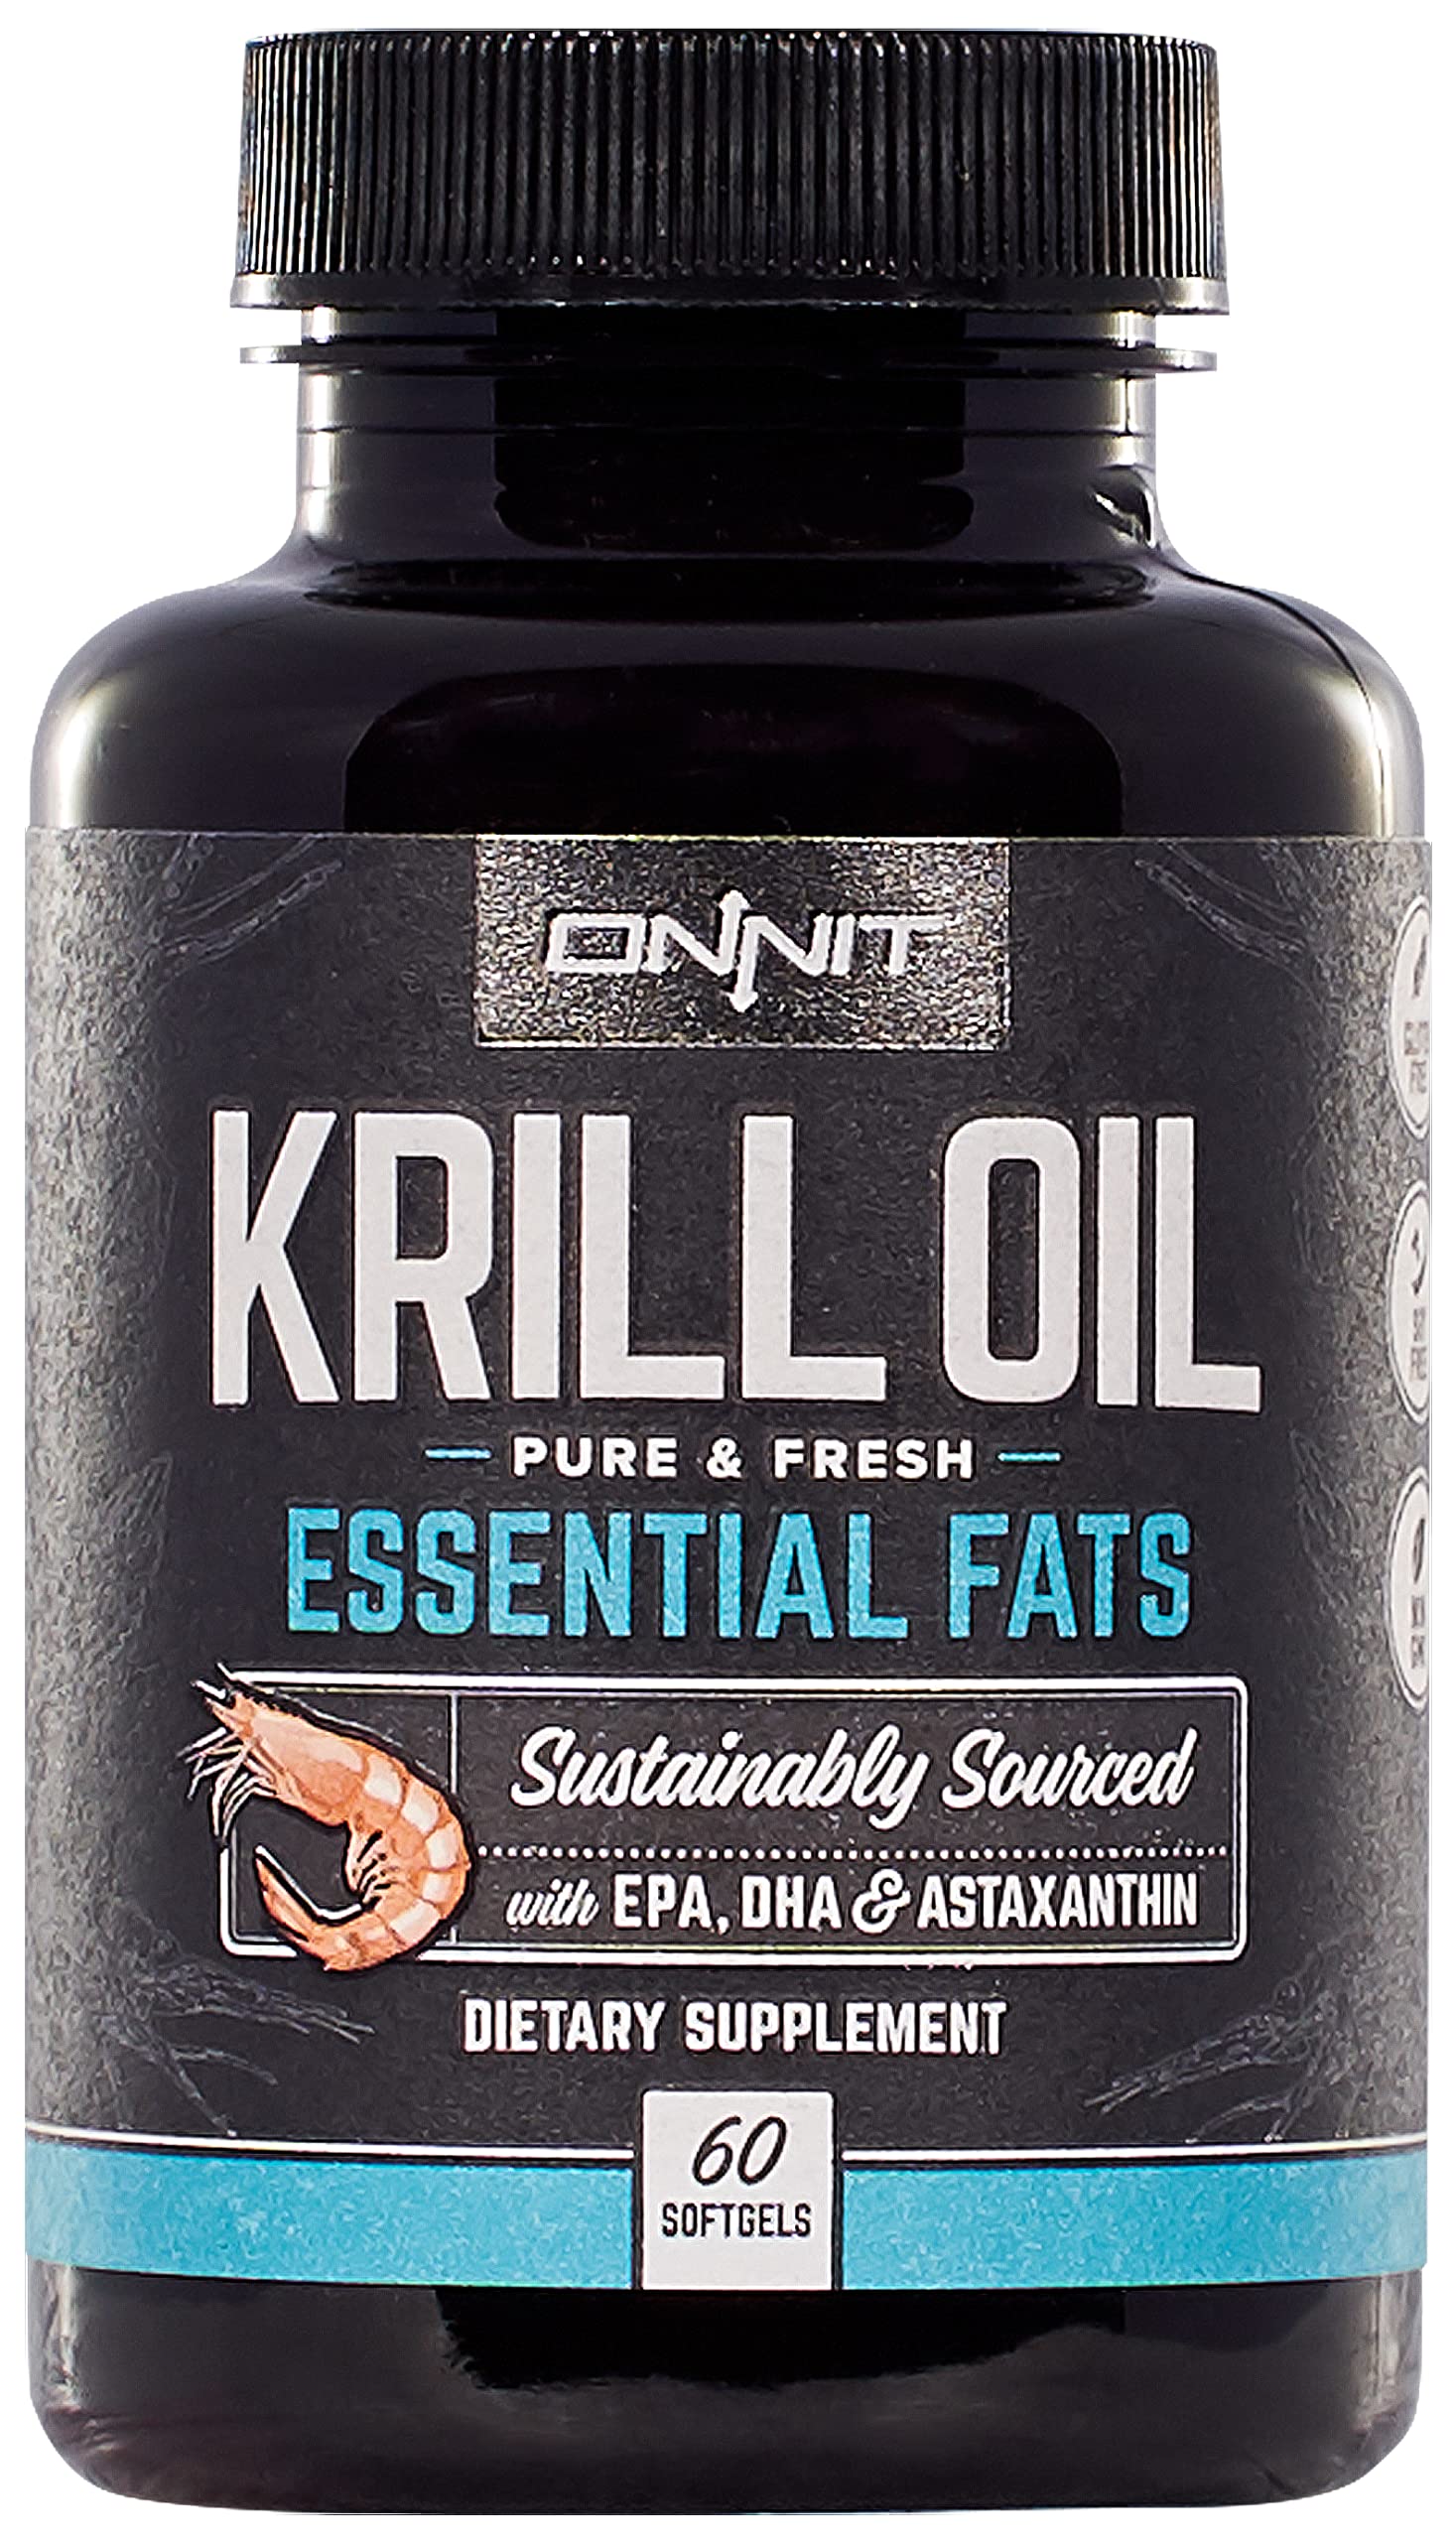 ONNIT Antarctic Krill Oil - 1000mg Per Serving - No Fishy Smell or Taste - Packed with Omega-3s, EPA, DHA, Astaxanthin & Phospholipids - Supports Healthy Joints, Brain, Heart, and Blood Pressure